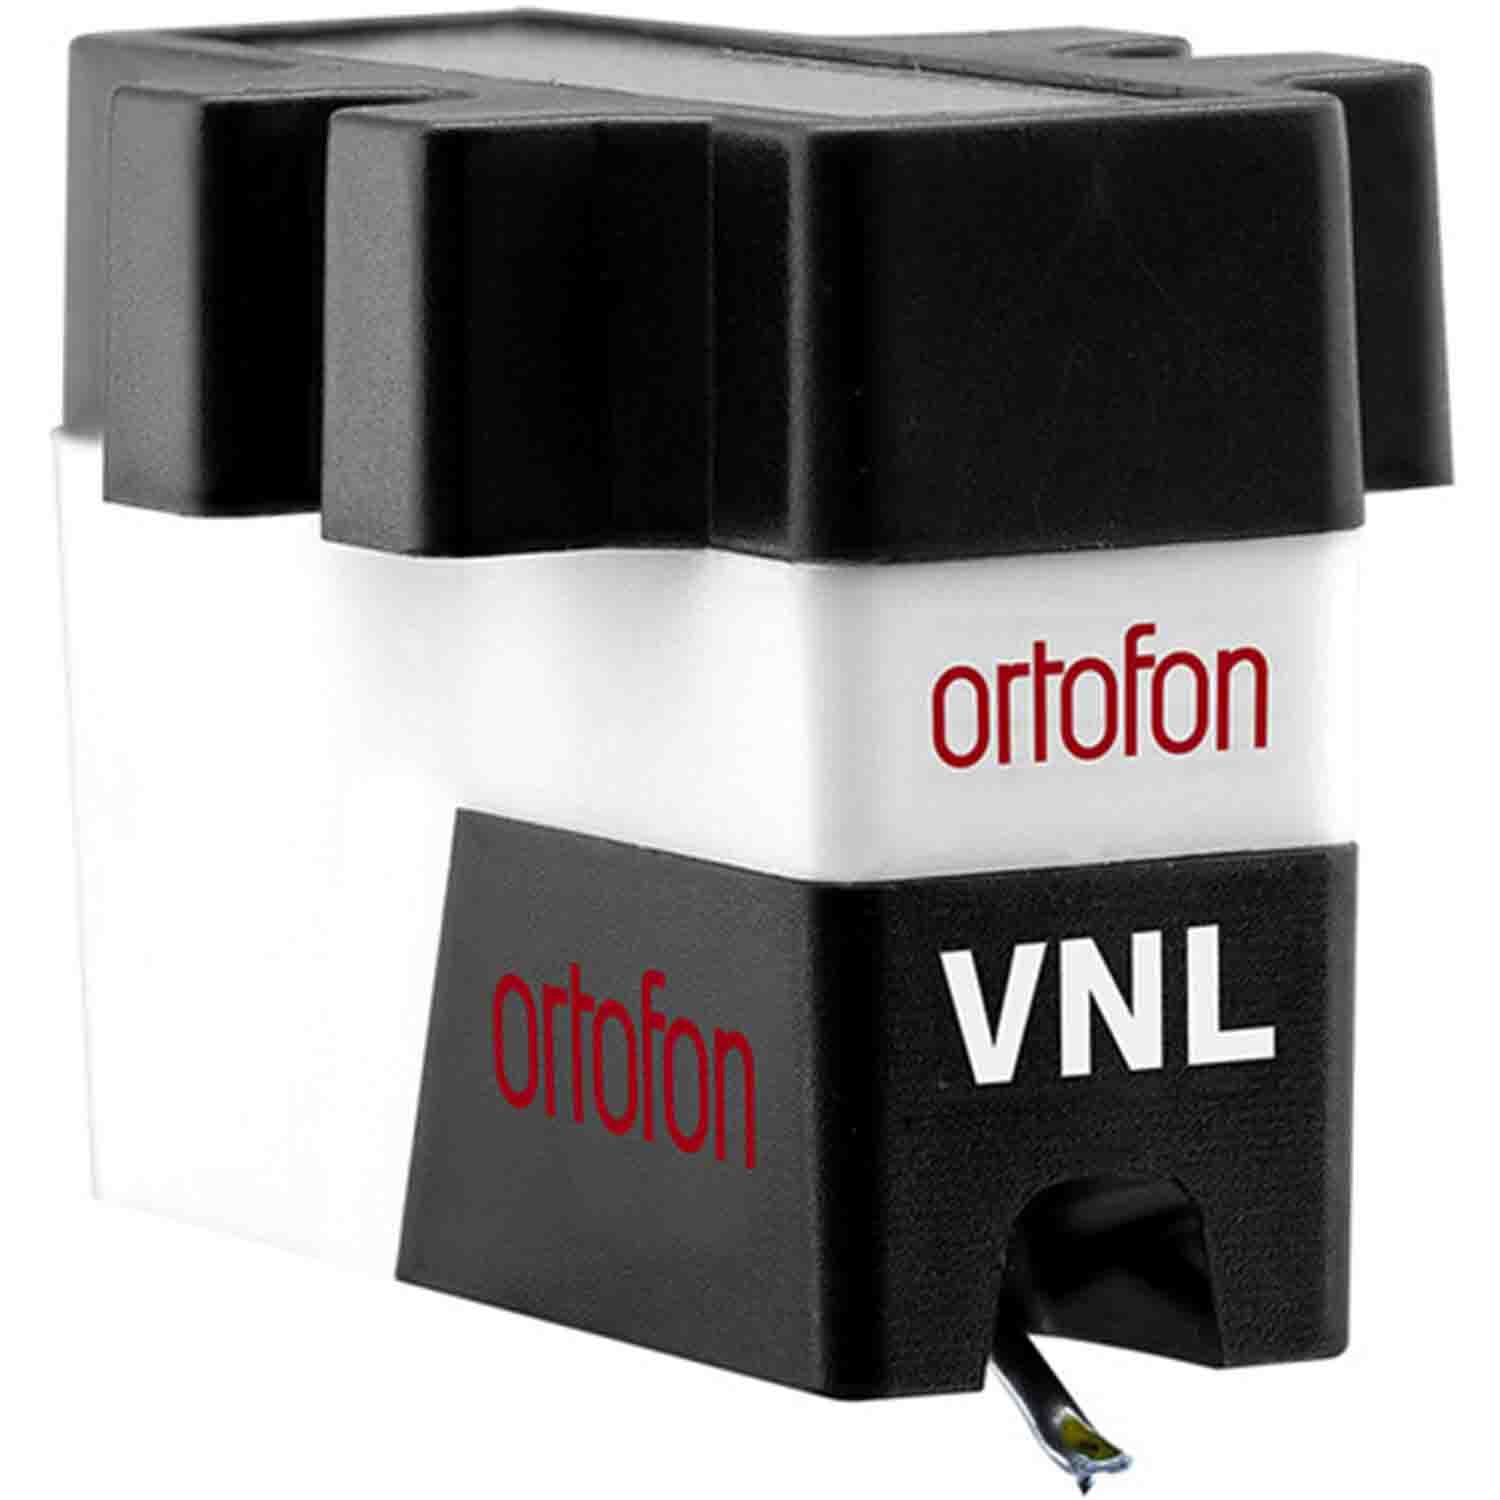 Ortofon VNL Moving Magnet Cartridge Introductory Set with 3 Styli - Hollywood DJ